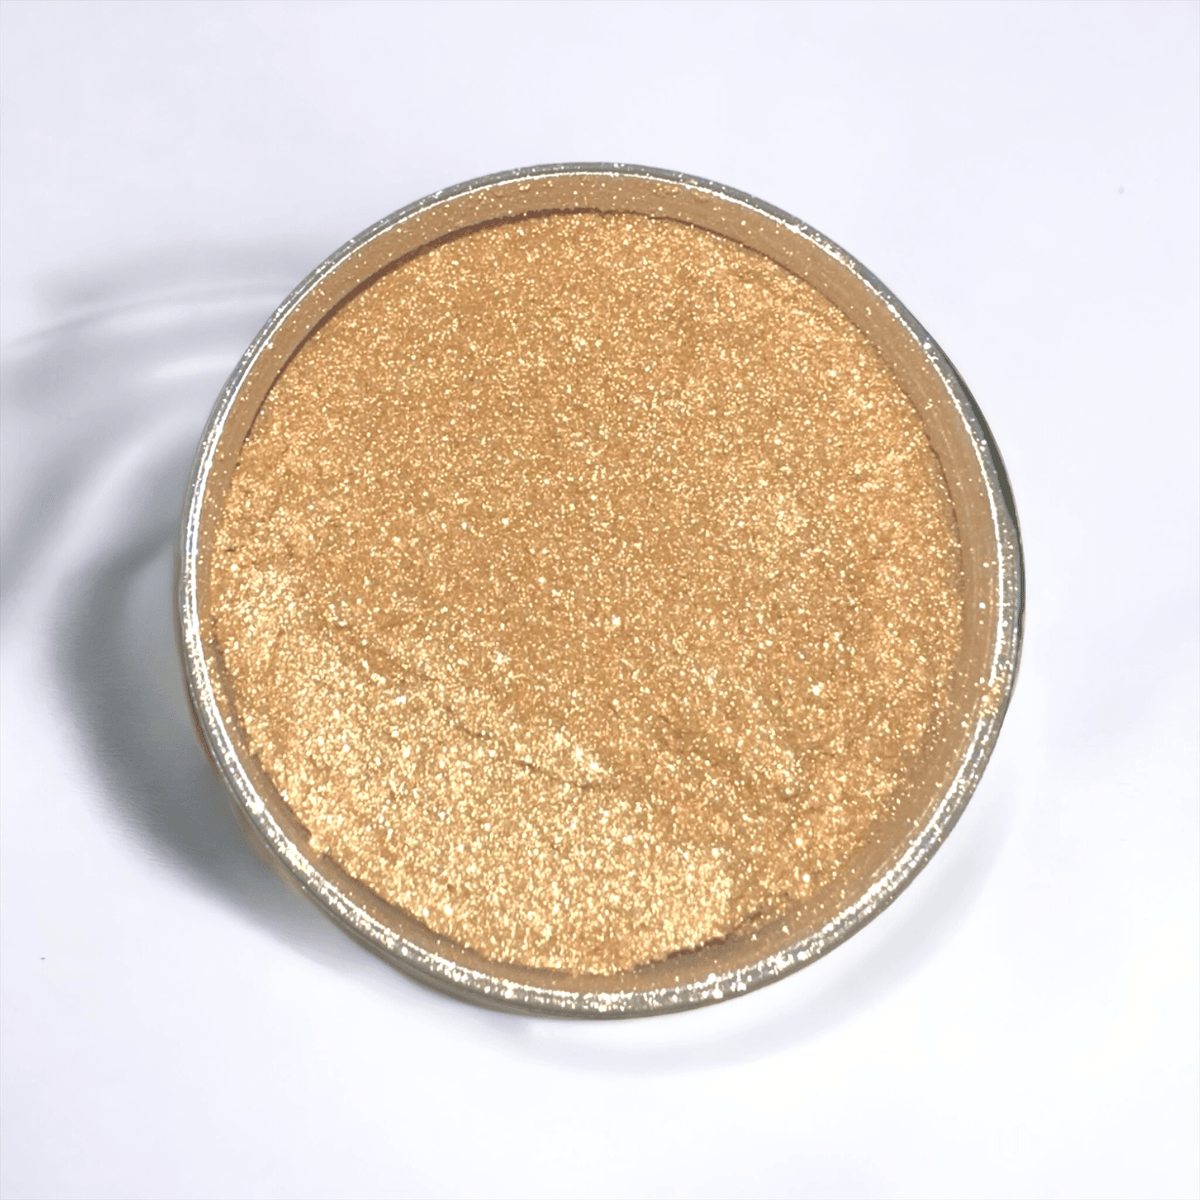 Pure Gold Mica Powder - Craftiful Fragrance Oils - Supplies for Wax Melts, Candles, Room Sprays, Reed Diffusers, Bath Bombs, Soaps, Perfumes, Bath Salts and Body Sprays